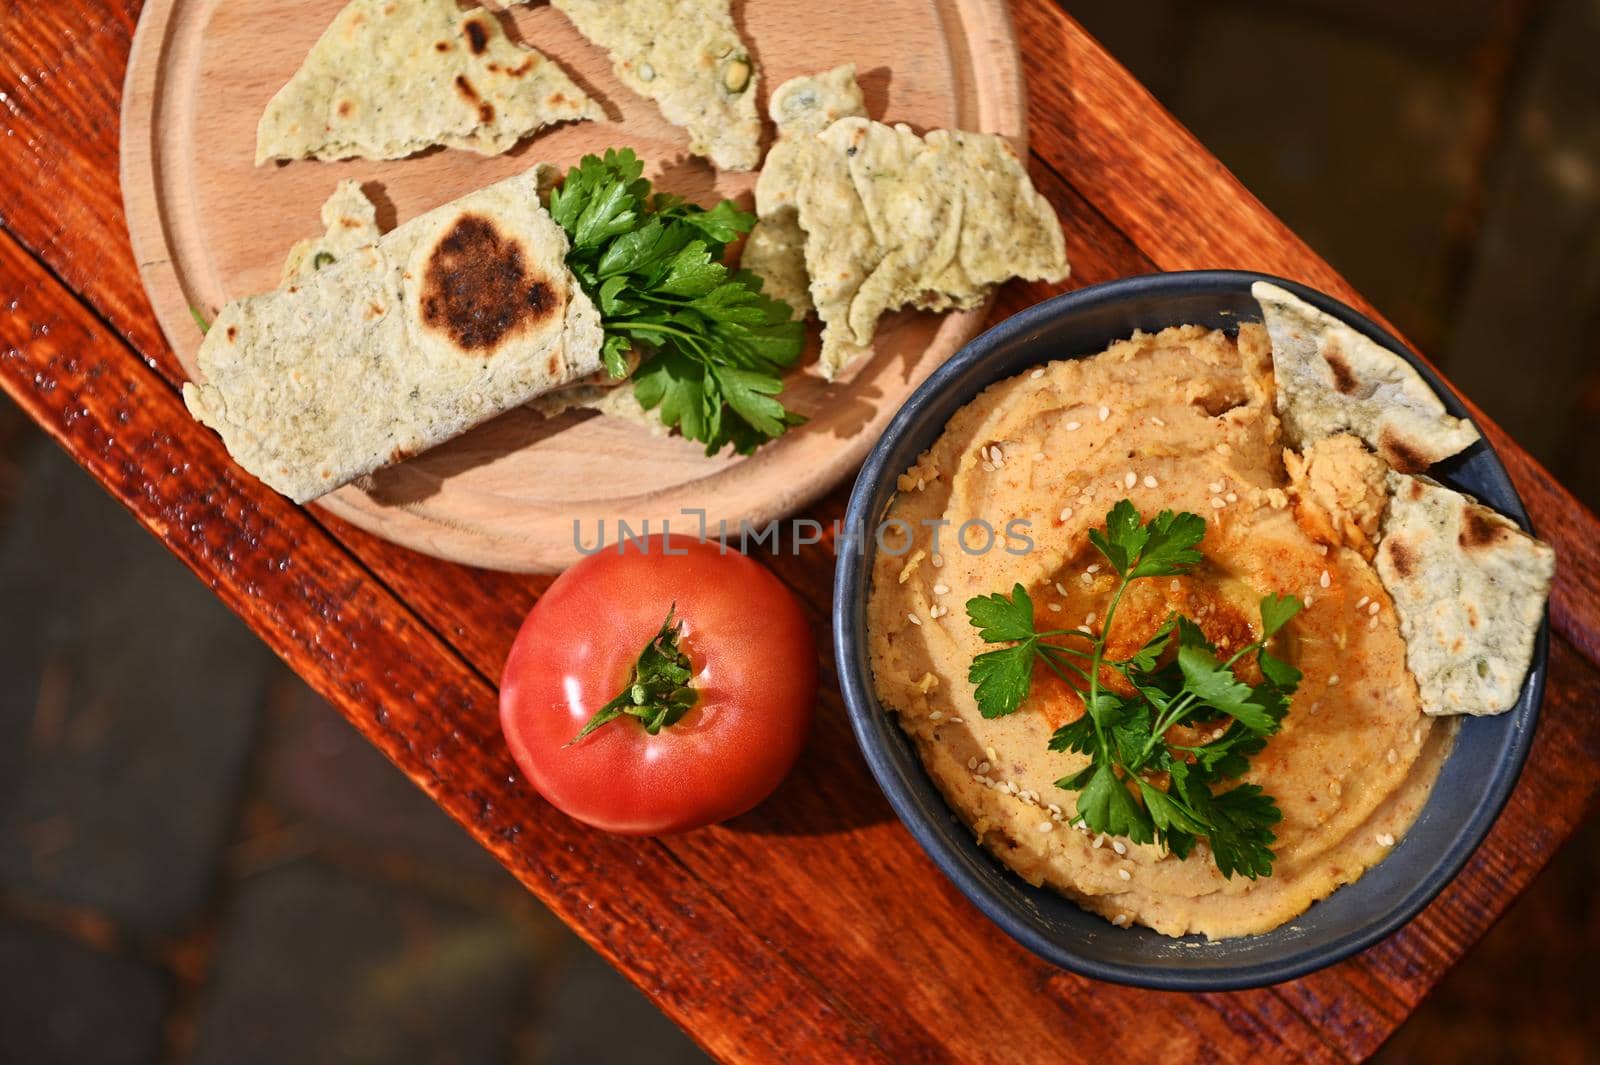 Overhead view of a bowl of a vegetarian chickpea hummus with sprinkled paprika and olive oil ripe red tomato and a wooden board with parsley wrapped in pit bread, on a rustic wooden table background